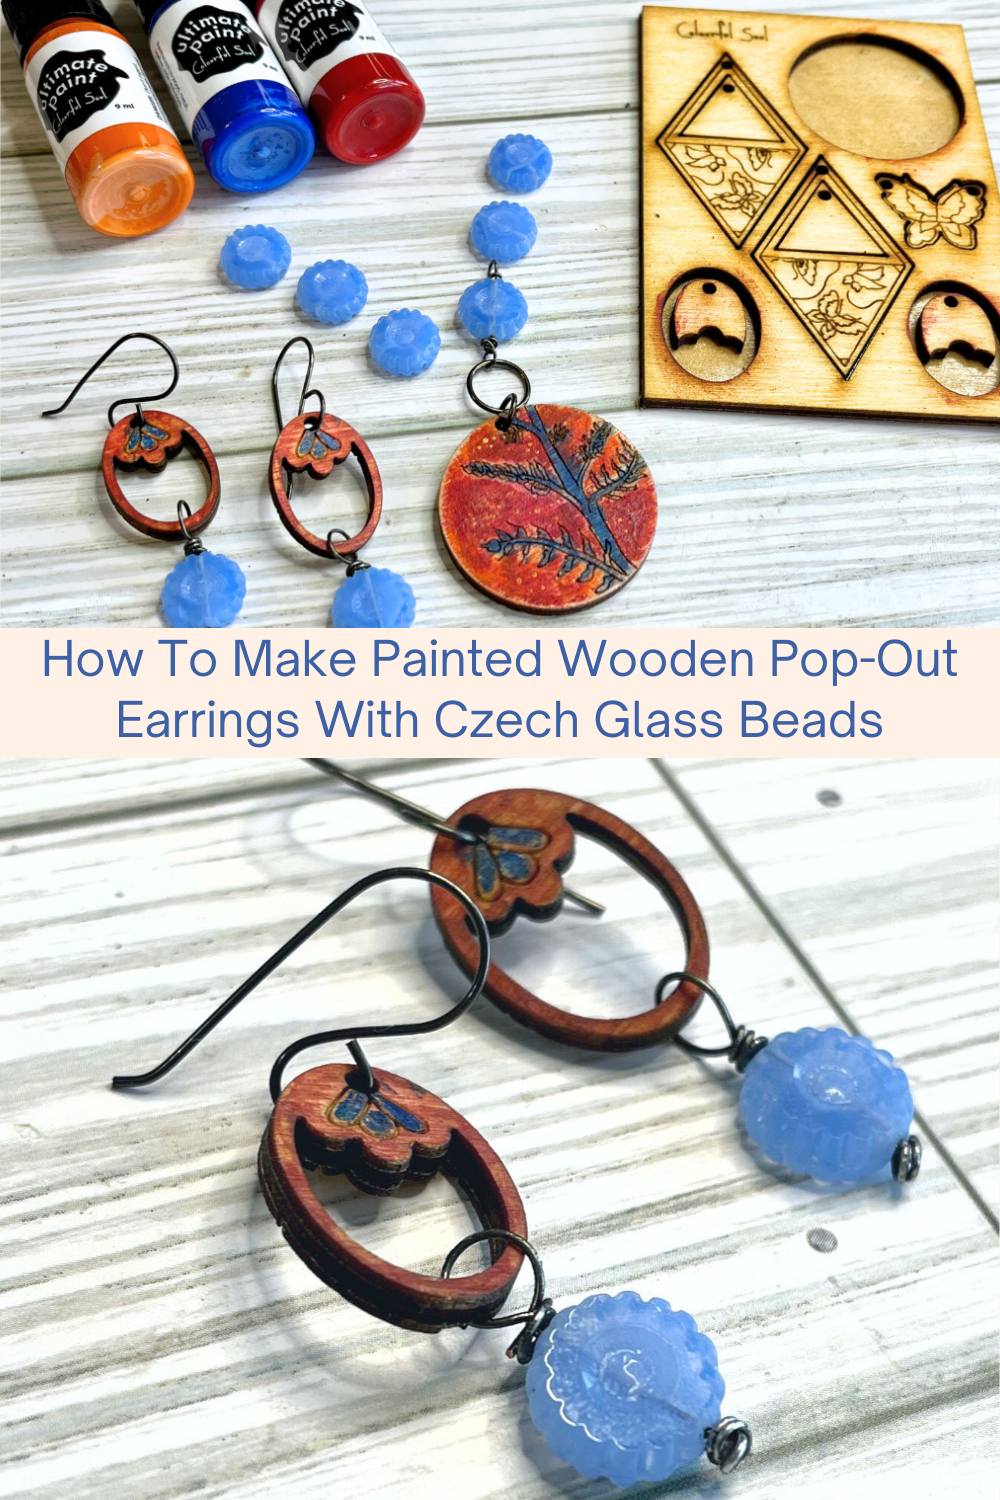 How To Make Painted Wooden Pop-Out Earrings With Czech Glass Beads Collage